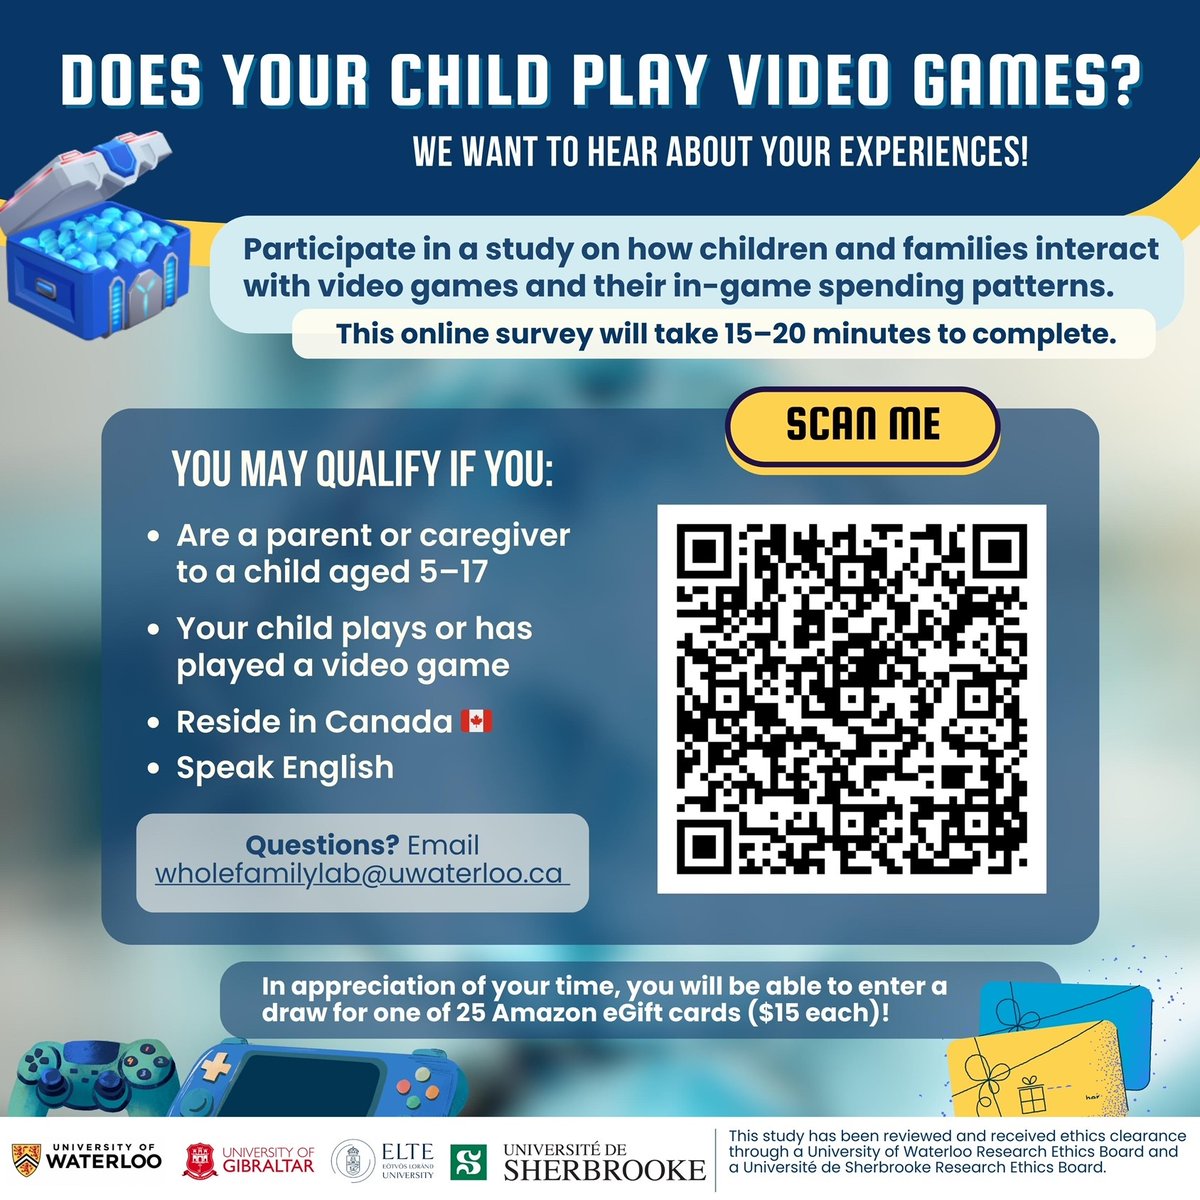 Please take part in this international study if your child plays video games. The team are interested in learning about the video gaming behaviours of children and caregivers, and their spending habits in video games. Thank you! @HBowdenJonesOBE uwaterloo.ca1.qualtrics.com/jfe/form/SV_da…